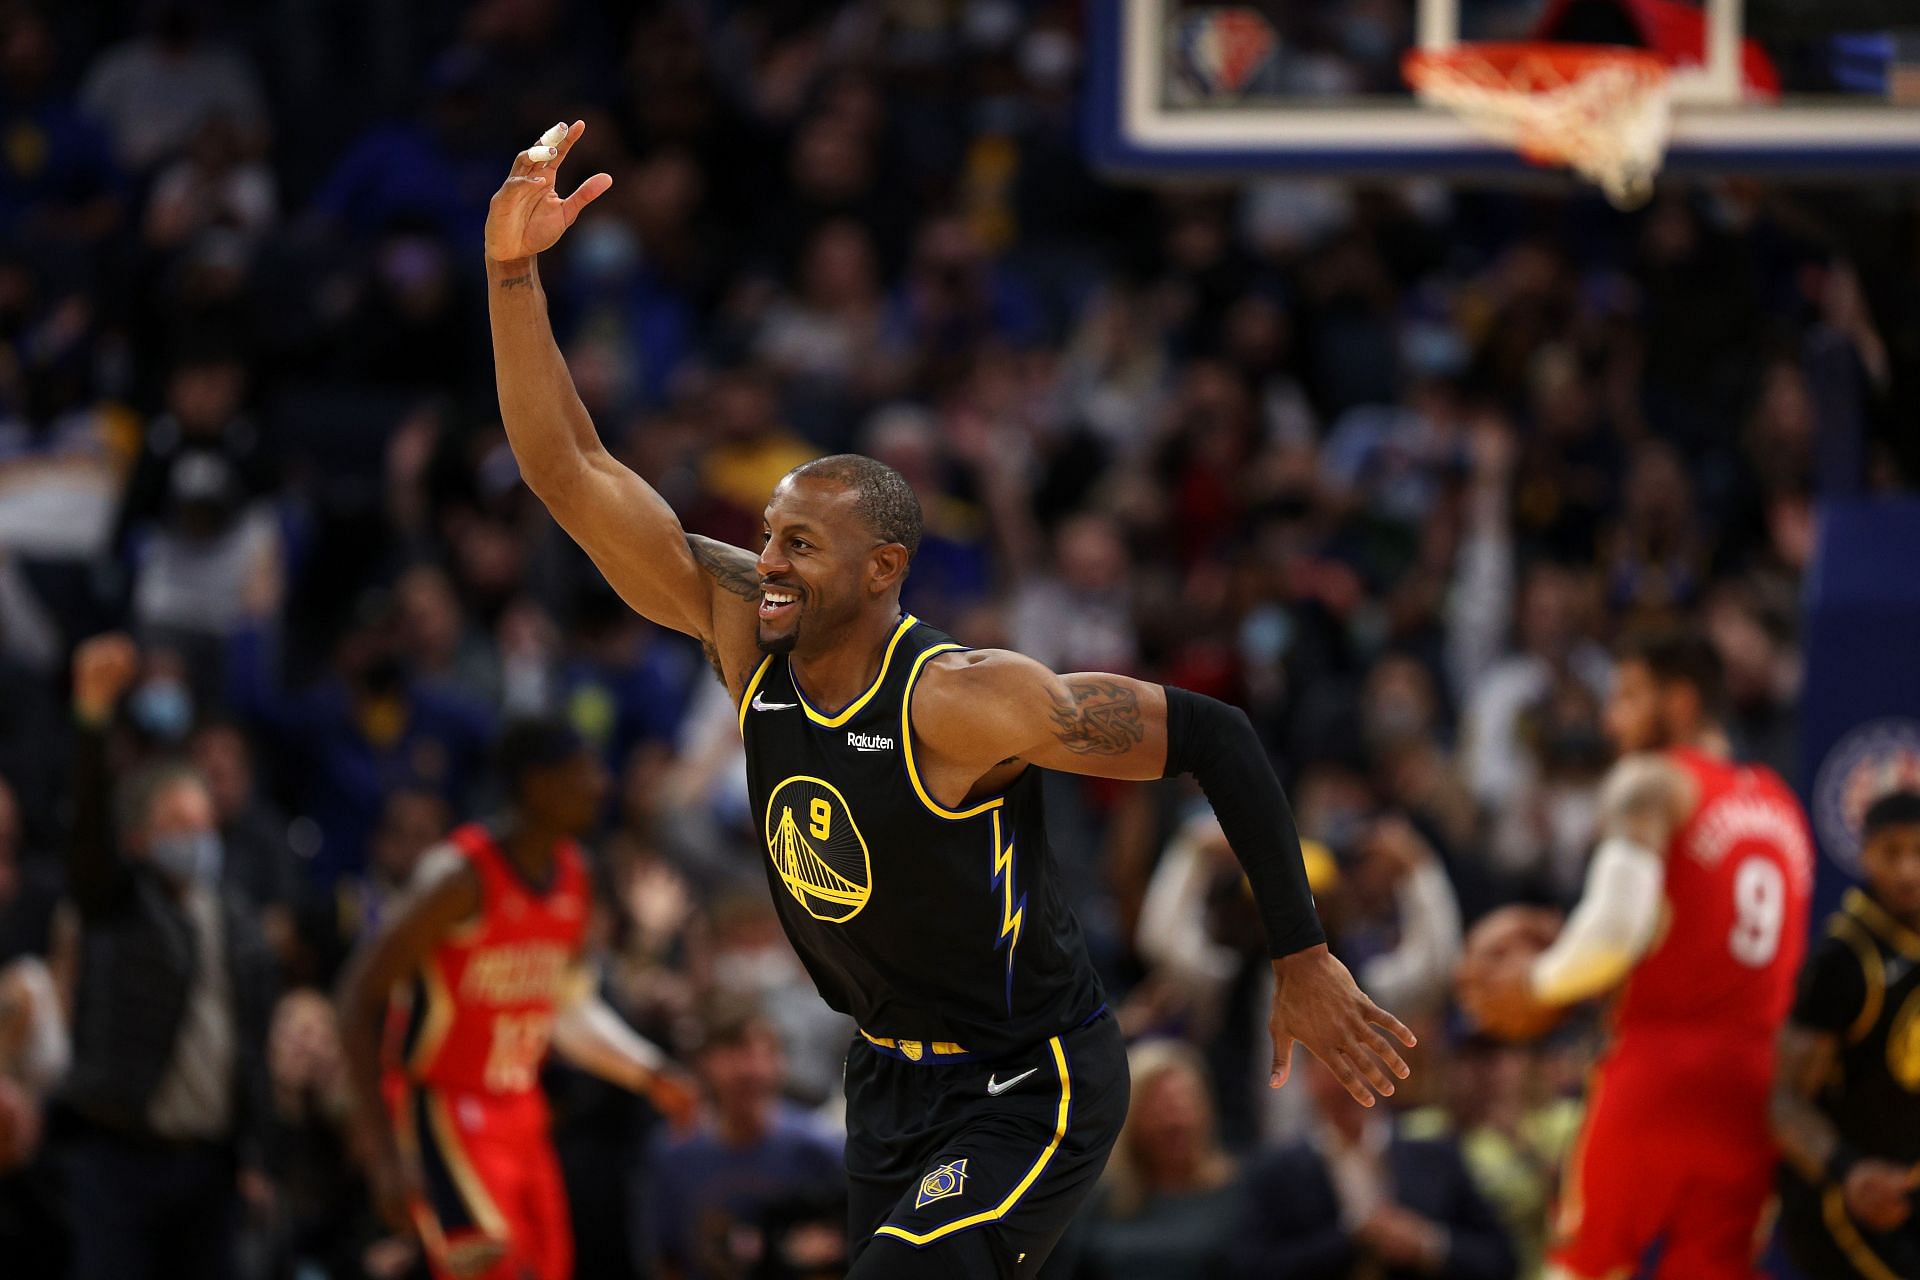 Andre Iguodala in action during New Orleans Pelicans v Golden State Warriors